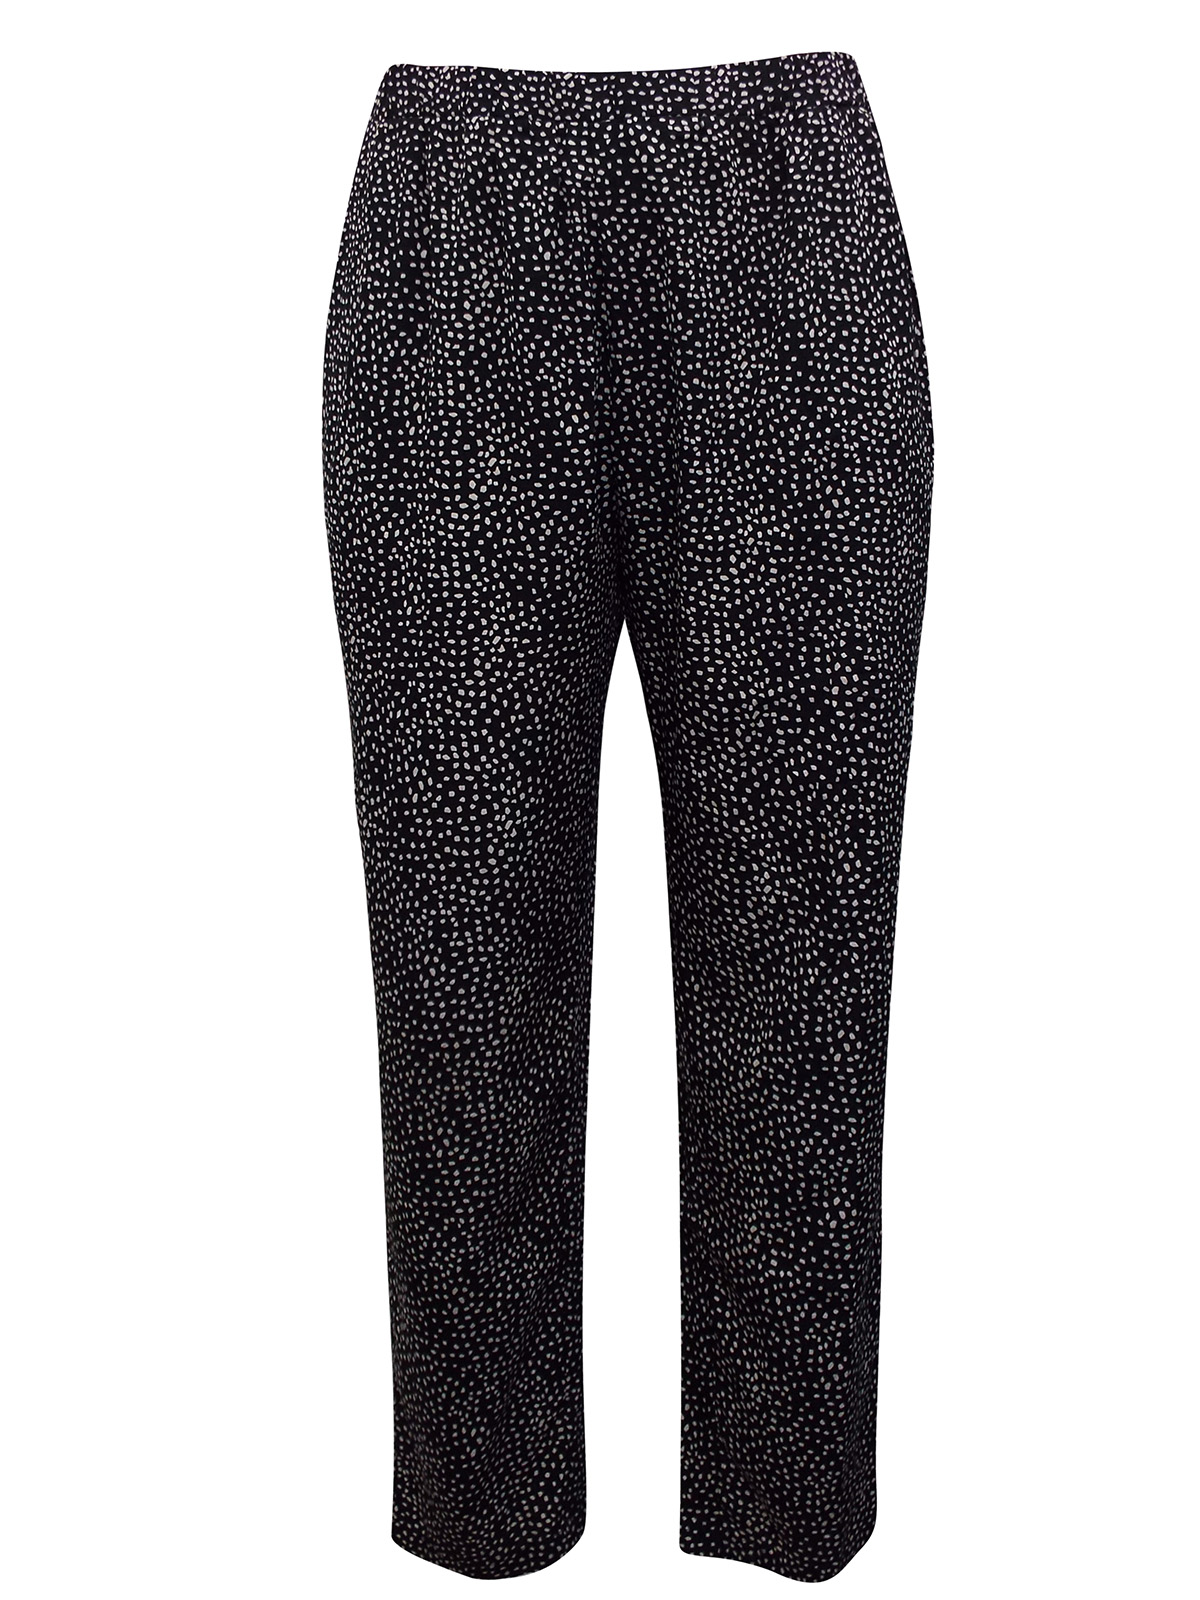 Wholesale Plus Size Clothing From Marisota Marisota Black Printed Tapered Leg Trousers